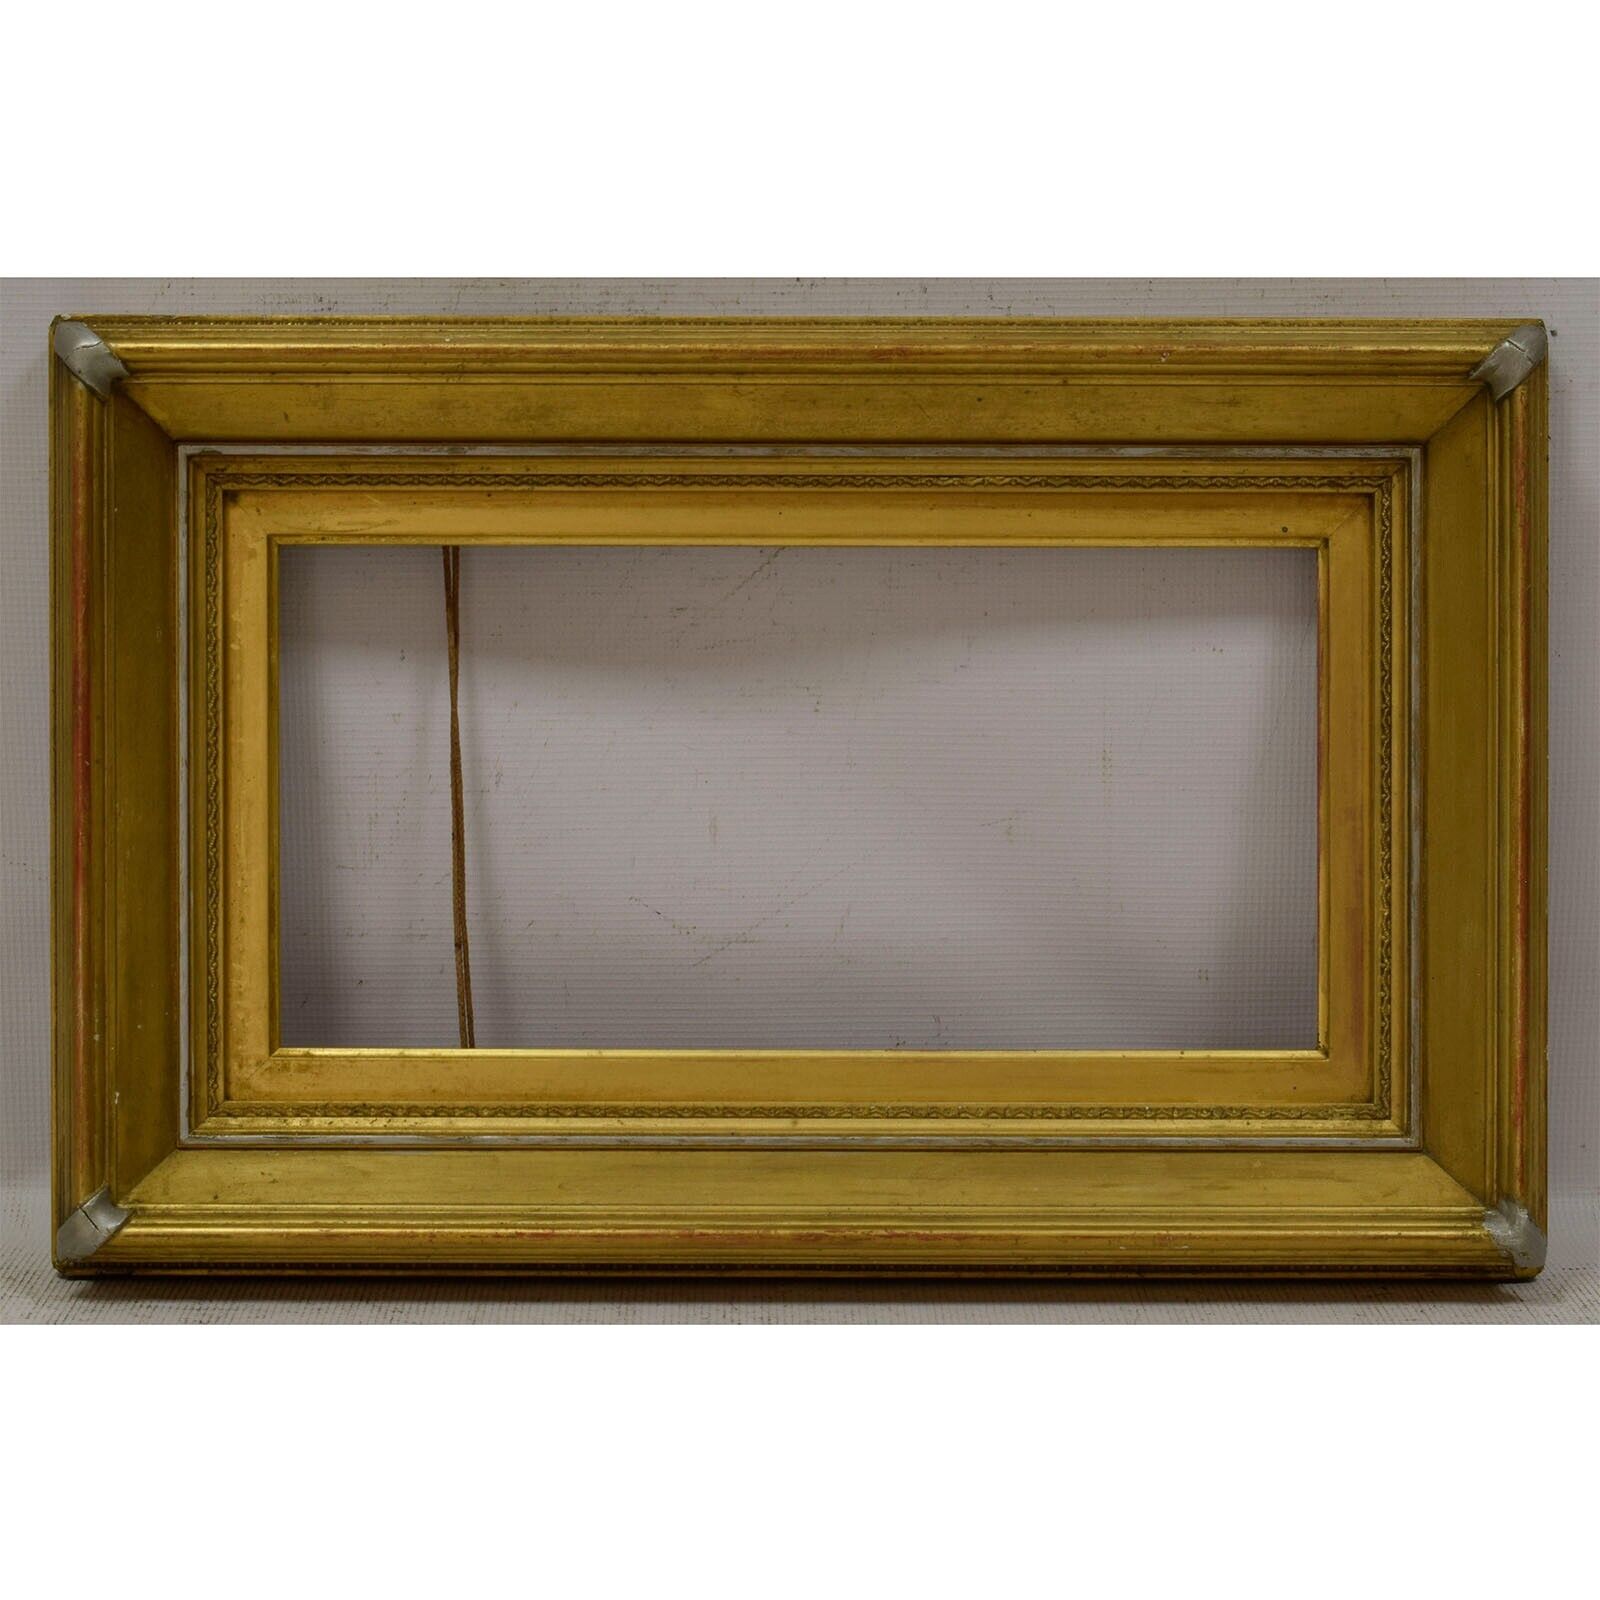 Ca 1880- 1900 Old wooden frame original condition Internal: 16.1 x 8.1 in